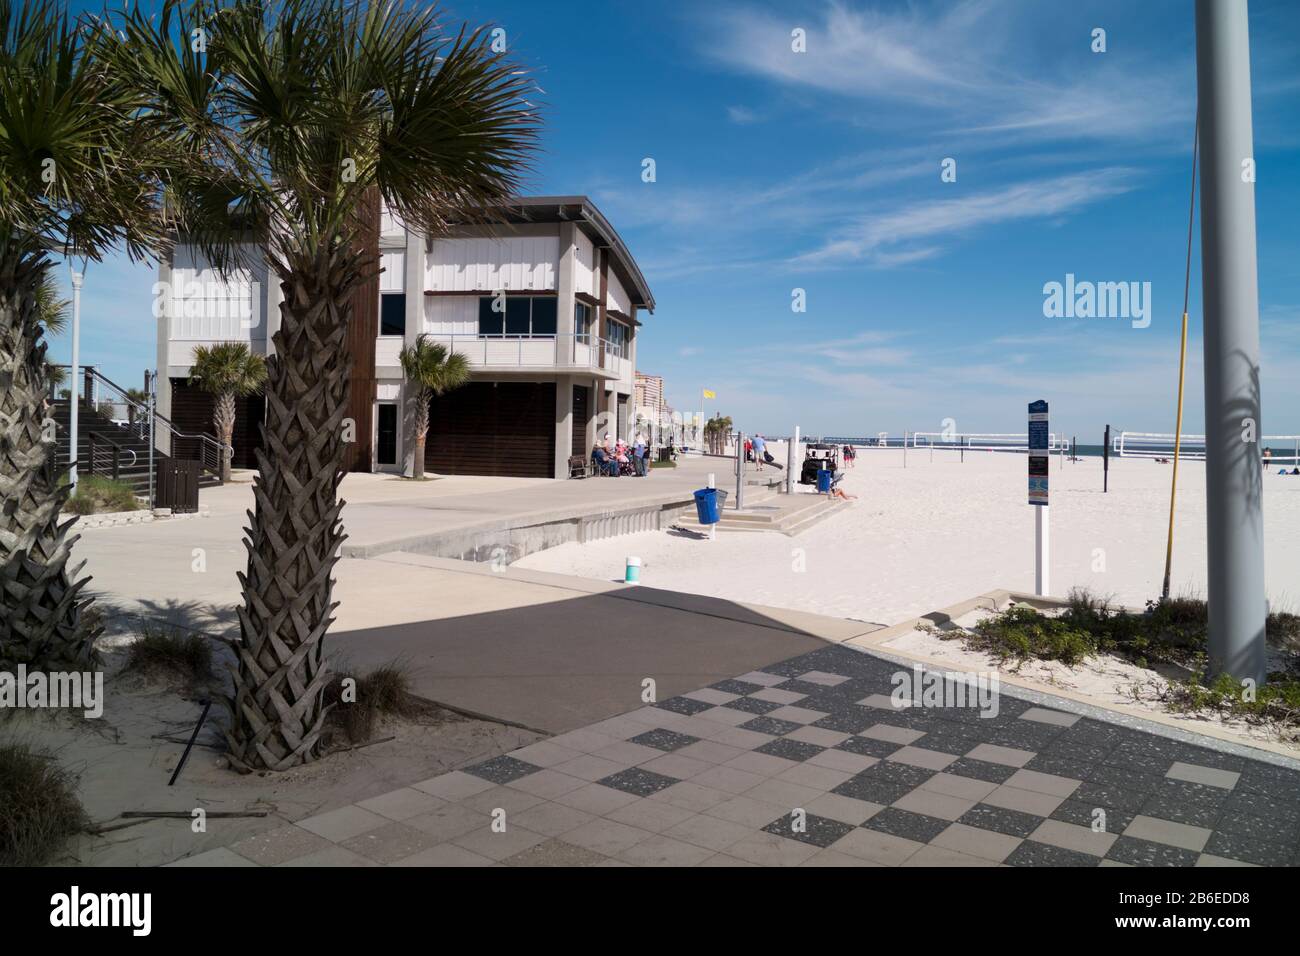 People relaxing on the Gulf of Mexico beach at Gulf Shores, Alabama, USA. Stock Photo